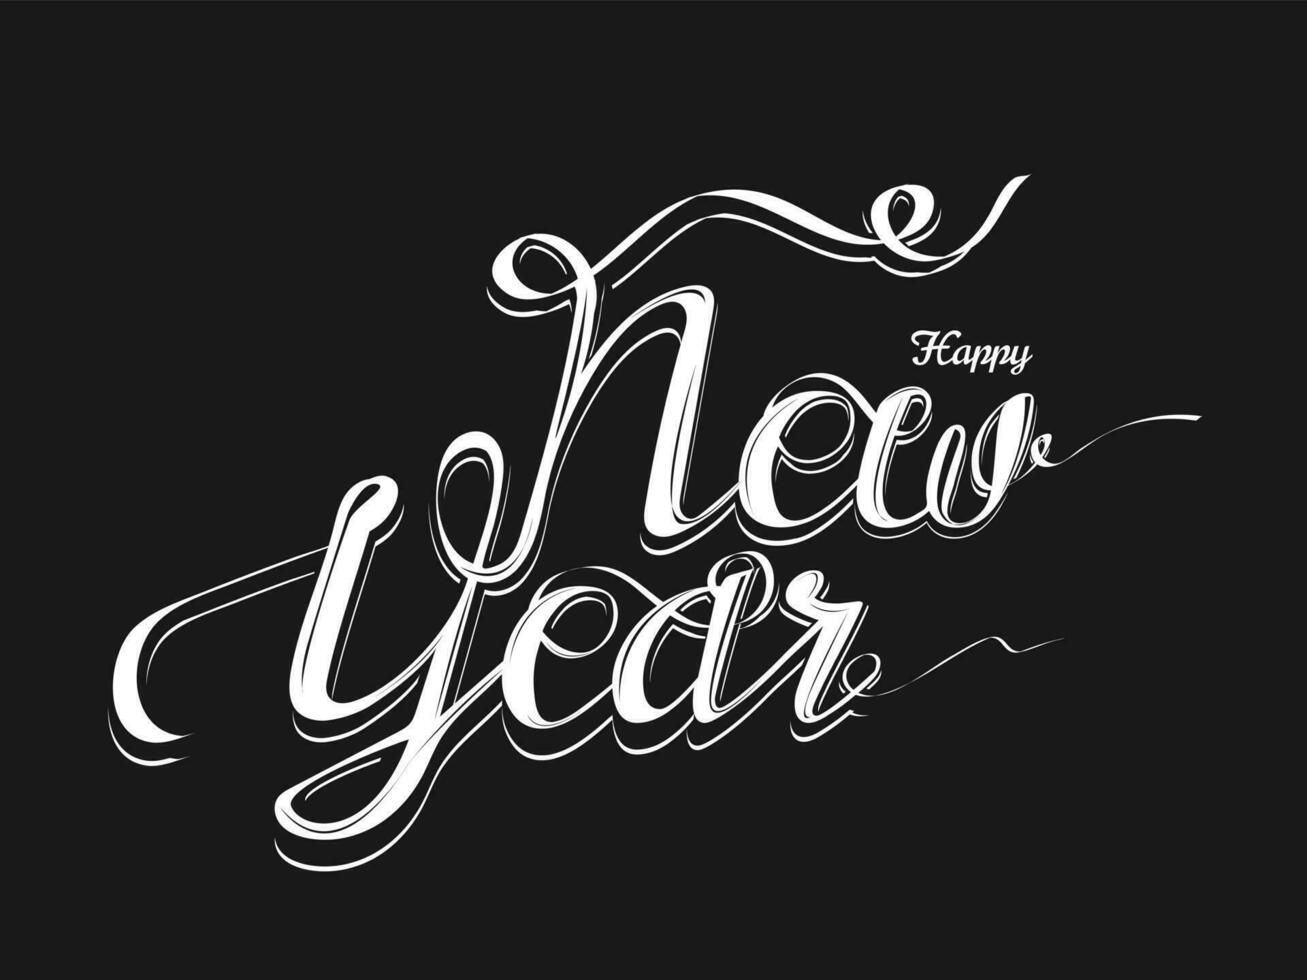 Calligraphy of Happy New Year on black background can be used as greeting card design. vector